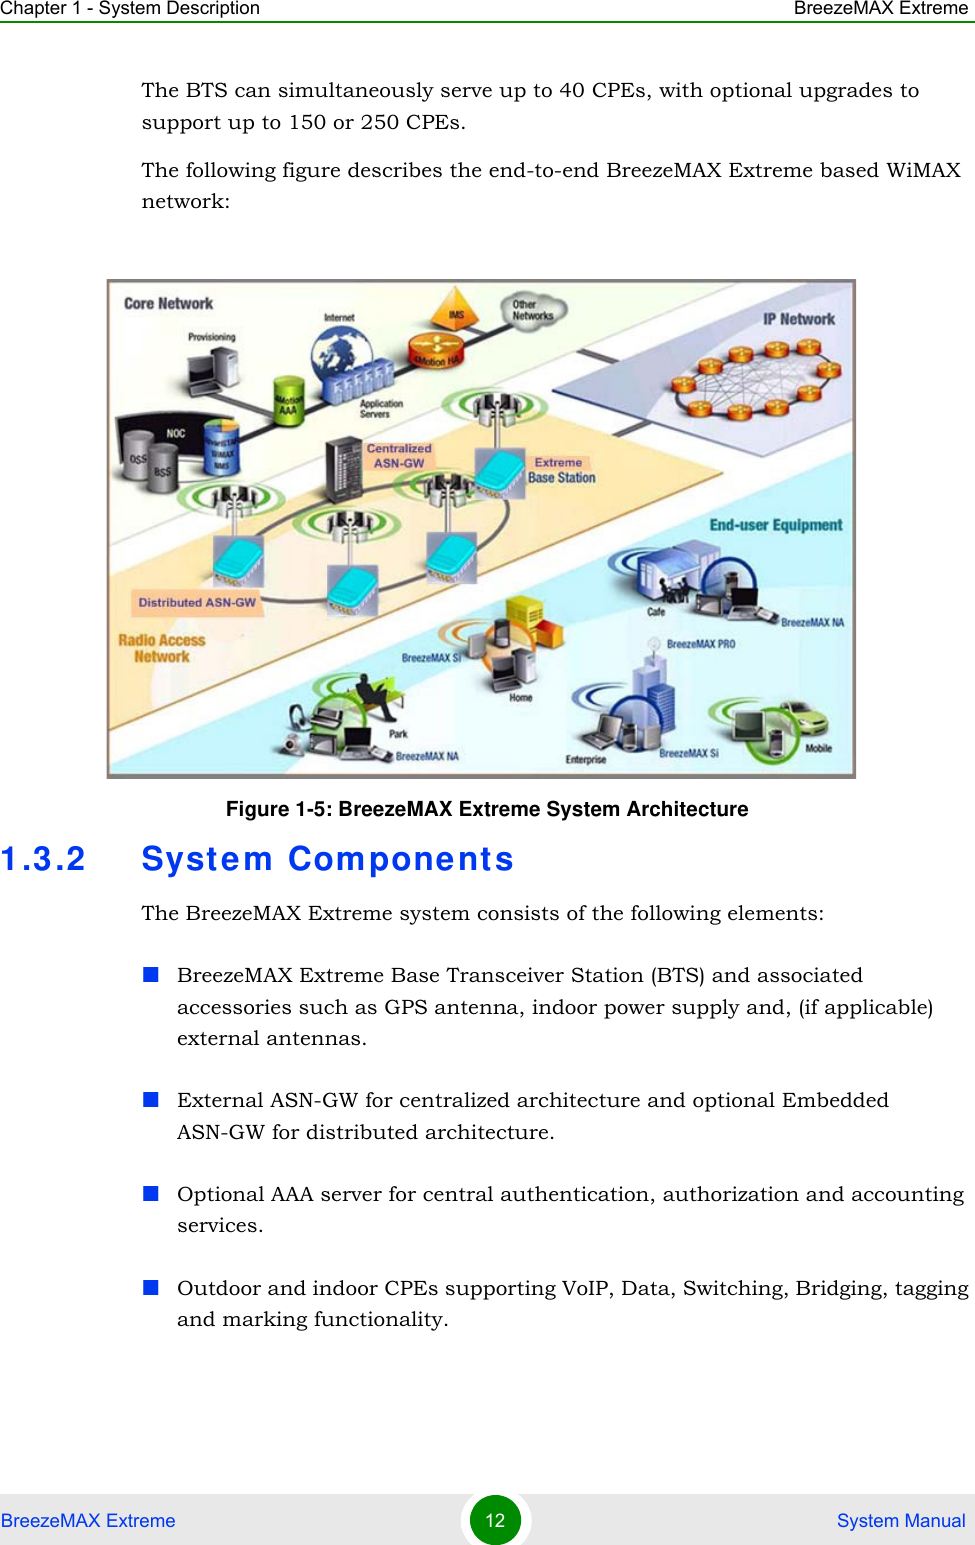 Chapter 1 - System Description BreezeMAX ExtremeBreezeMAX Extreme 12  System ManualThe BTS can simultaneously serve up to 40 CPEs, with optional upgrades to support up to 150 or 250 CPEs.The following figure describes the end-to-end BreezeMAX Extreme based WiMAX network:1.3.2 System ComponentsThe BreezeMAX Extreme system consists of the following elements:BreezeMAX Extreme Base Transceiver Station (BTS) and associated accessories such as GPS antenna, indoor power supply and, (if applicable) external antennas.External ASN-GW for centralized architecture and optional Embedded ASN-GW for distributed architecture.Optional AAA server for central authentication, authorization and accounting services.Outdoor and indoor CPEs supporting VoIP, Data, Switching, Bridging, tagging and marking functionality.Figure 1-5: BreezeMAX Extreme System Architecture